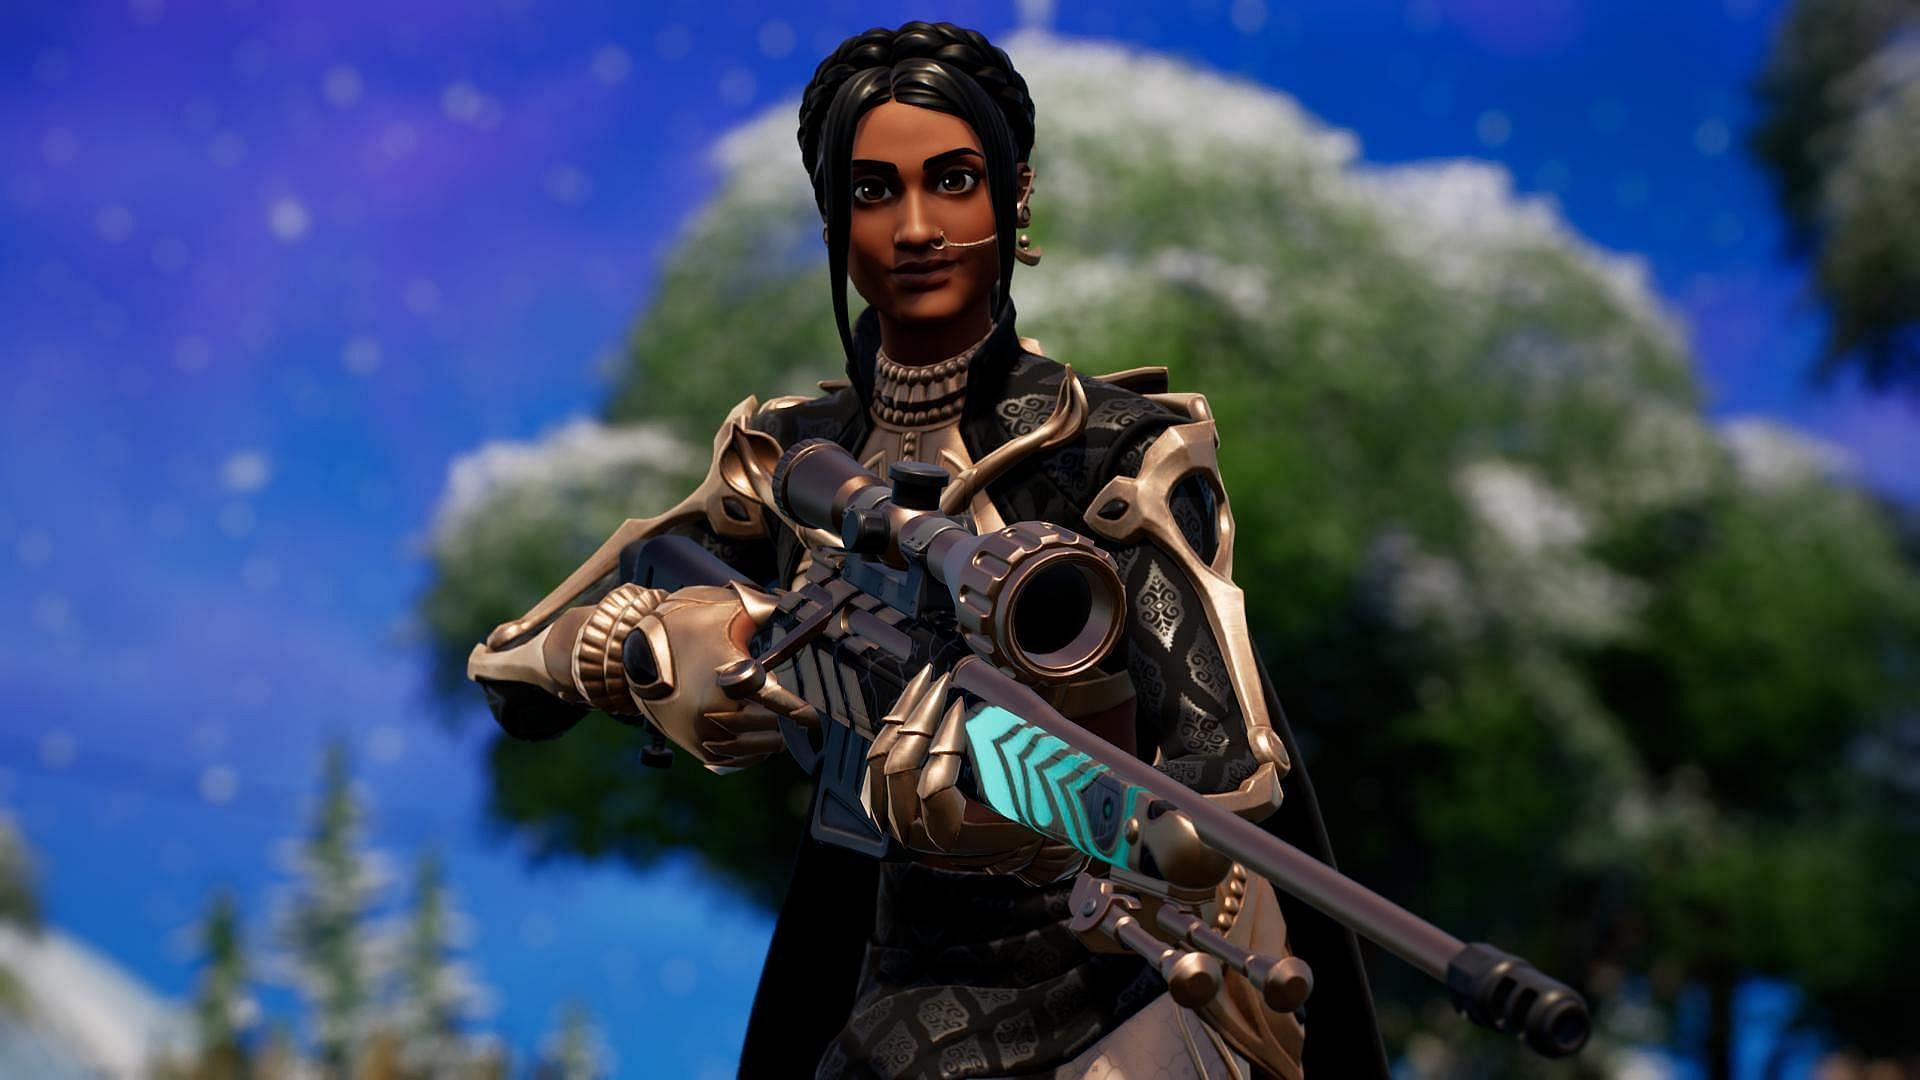 Shanta is one of the NPCs in Fortnite Chapter 3 Season 1 and players will have to open Seven vaults to complete her quests (Image via Epic Games)